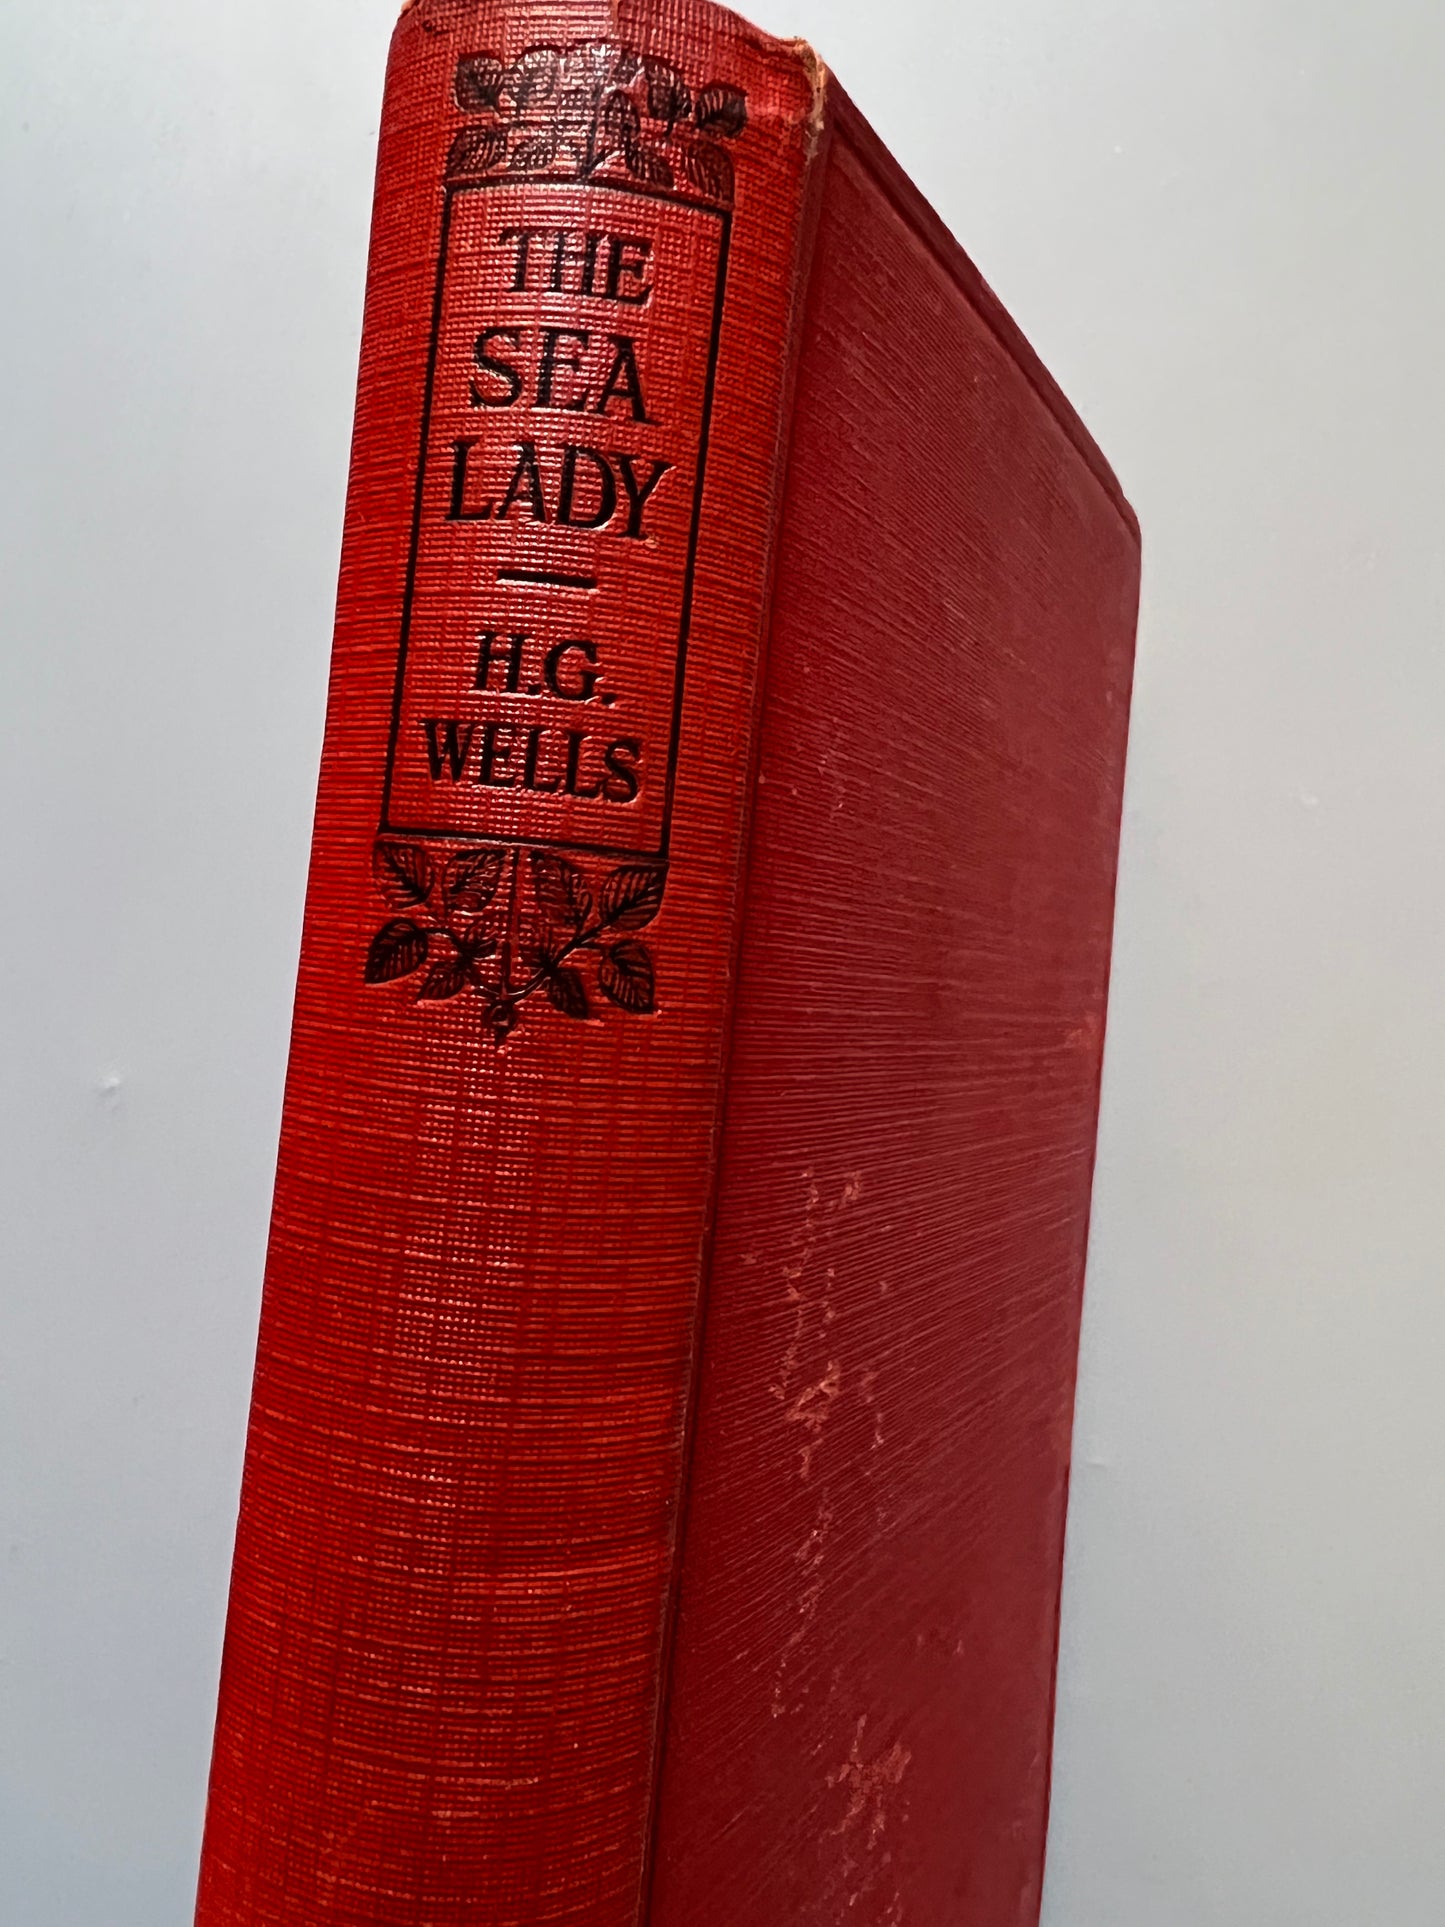 The sea lady, a tissue of moonshine, H. G. Wells - Methuen & Co, 1927